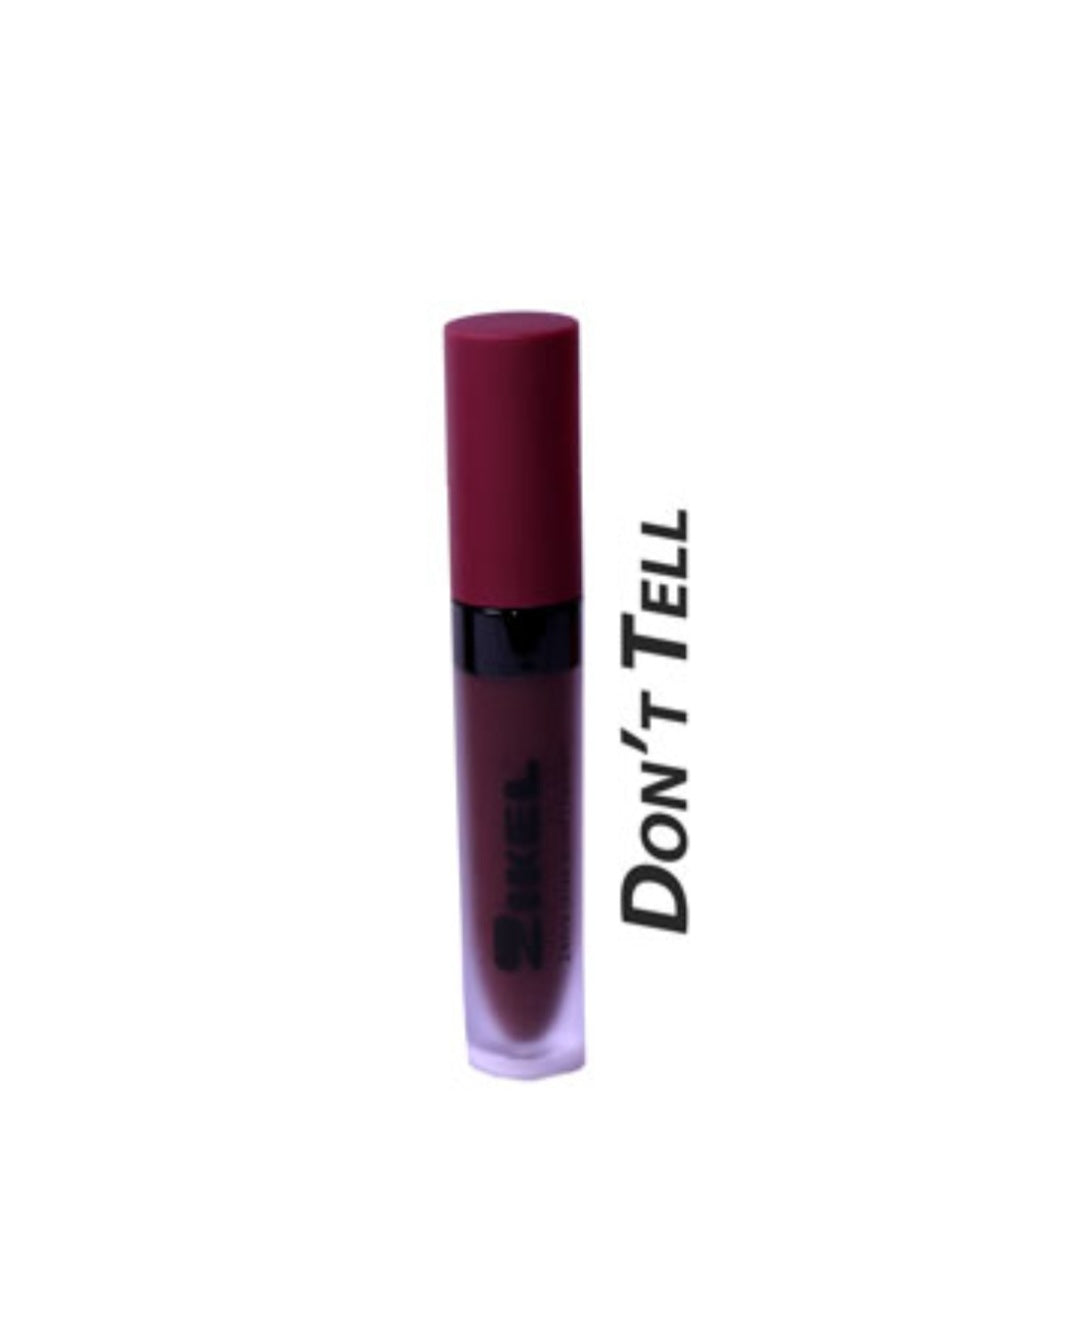 ZIKEL KISSPROOF Matte Lipstick~ Rossetto Opaco non trasferibile - SANDY'S MAKEUP AND ARTISTRY 